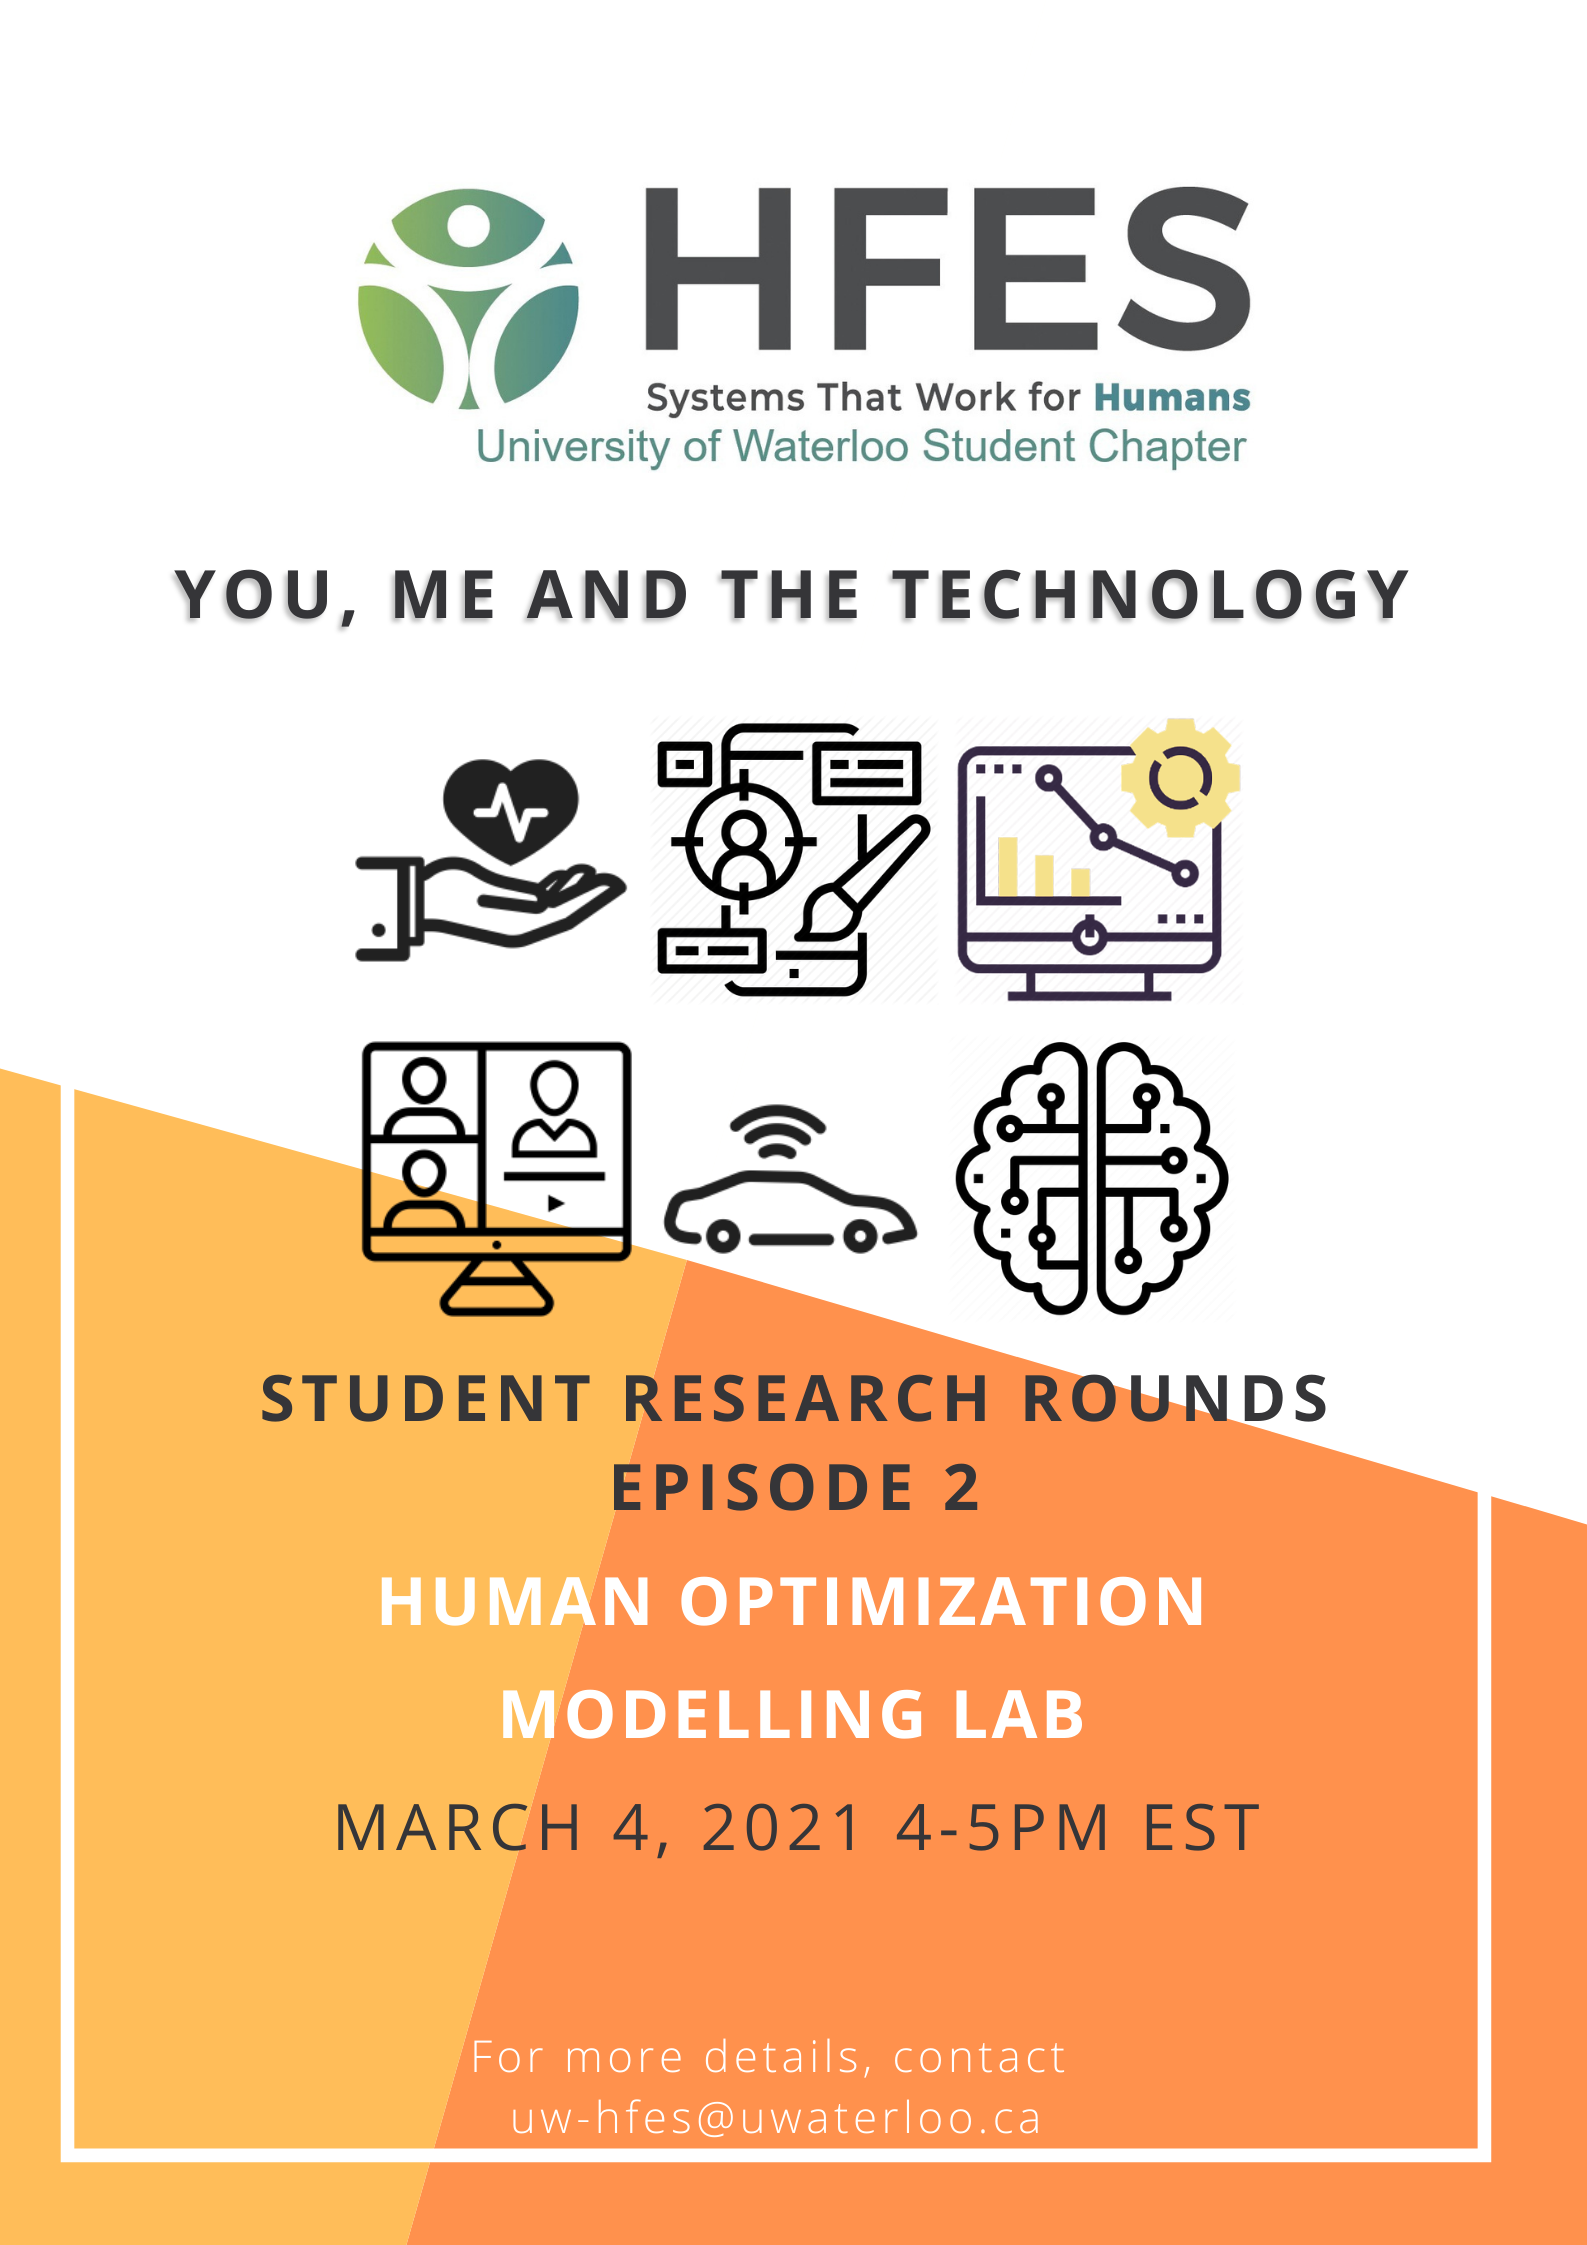 Student Research Rounds - Episode 2 featuring Human Optimization Modelling Lab